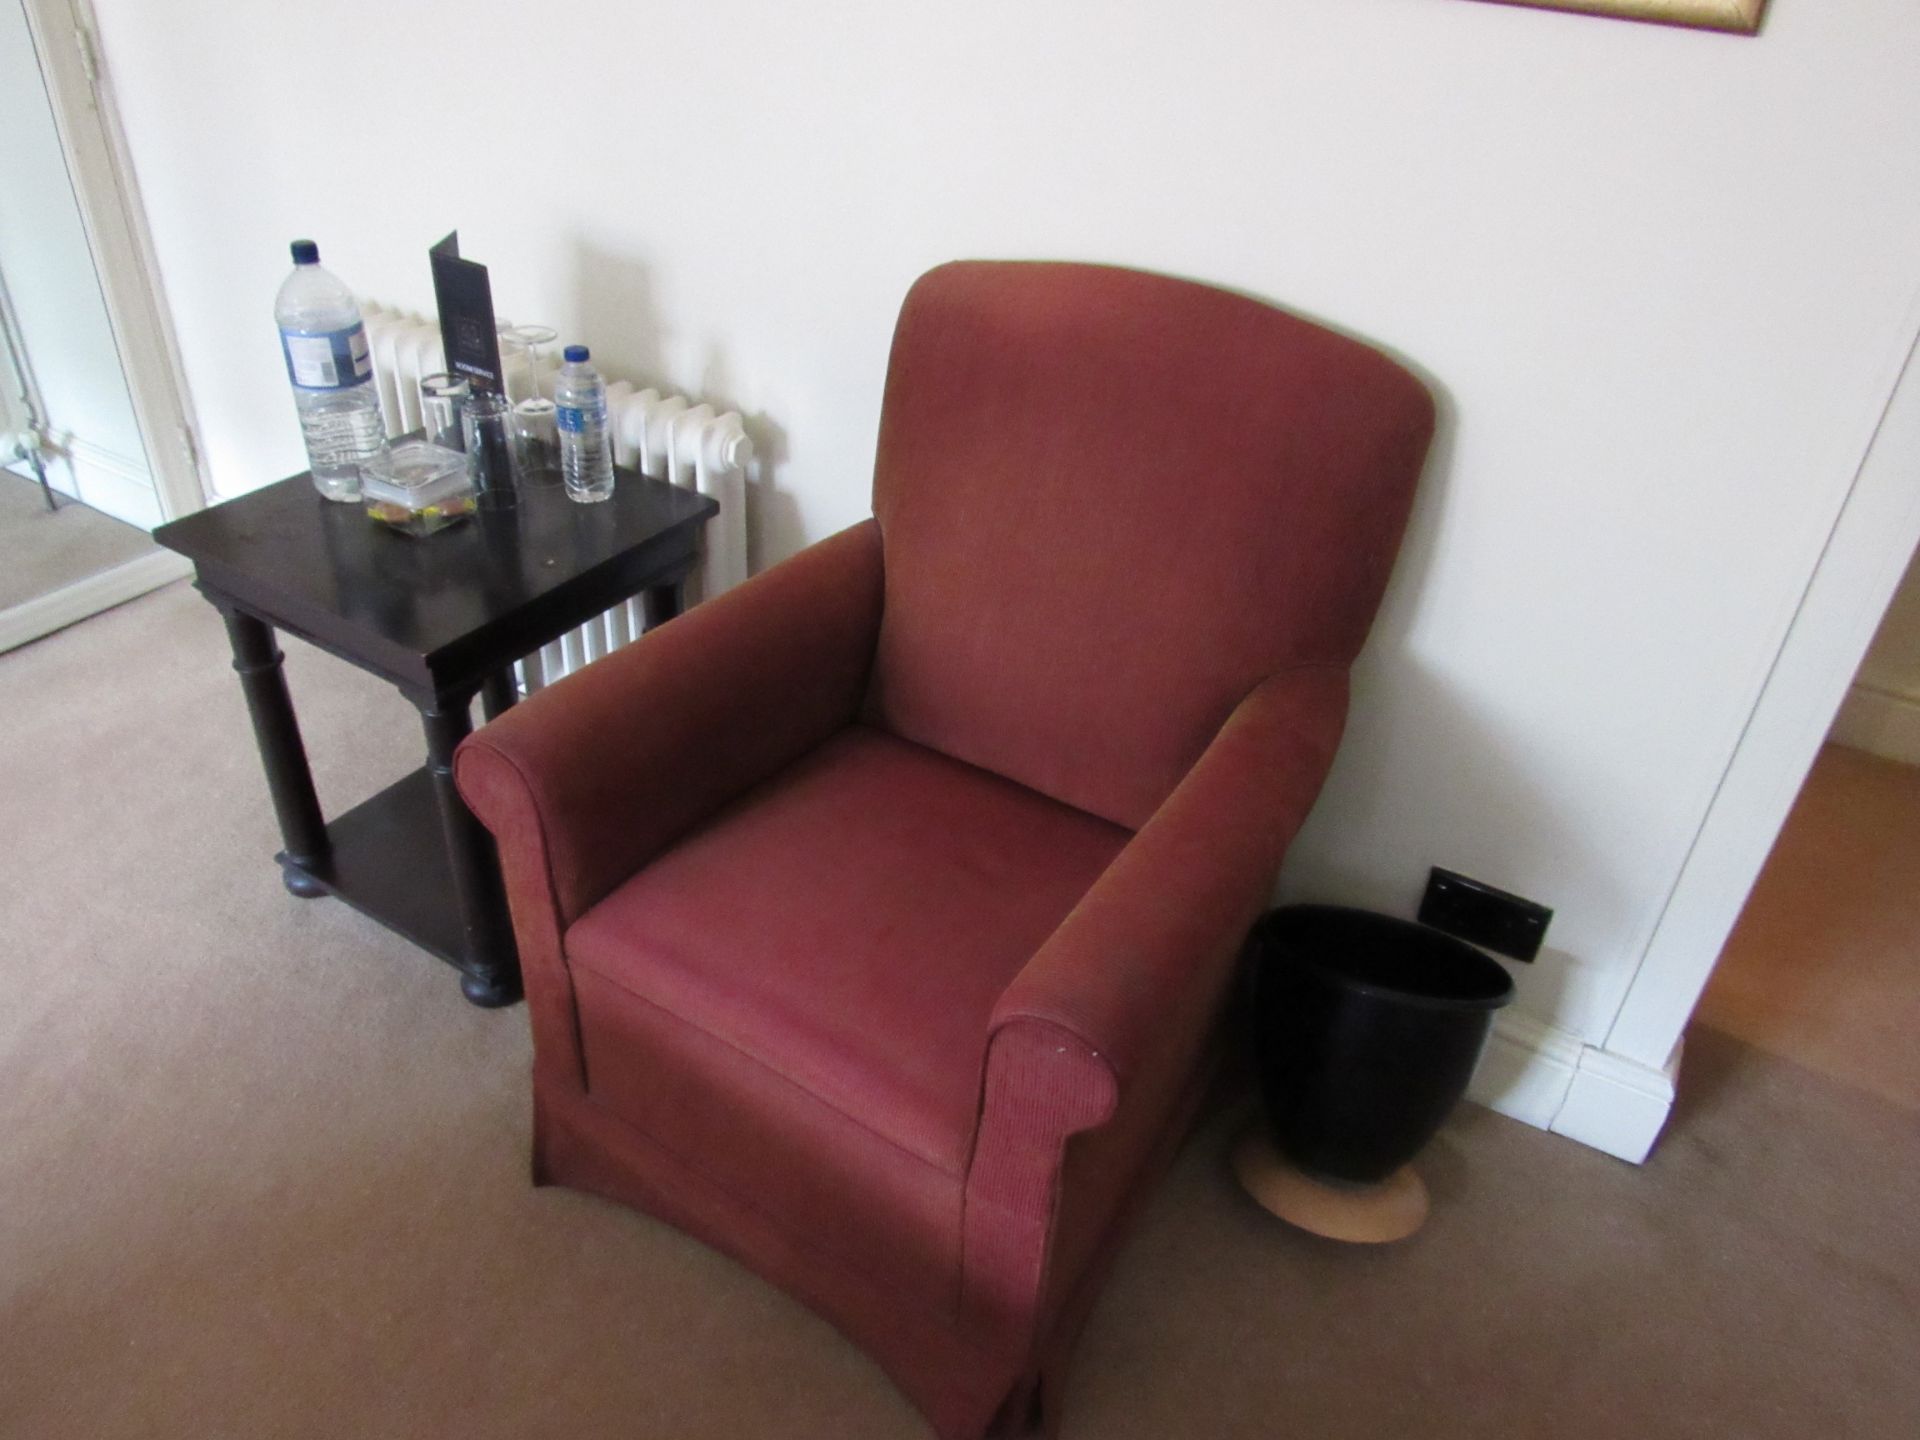 Contents to room 314 including bed base, desk, chair, arm chair, 3 small tables, art work, curtains, - Image 2 of 6